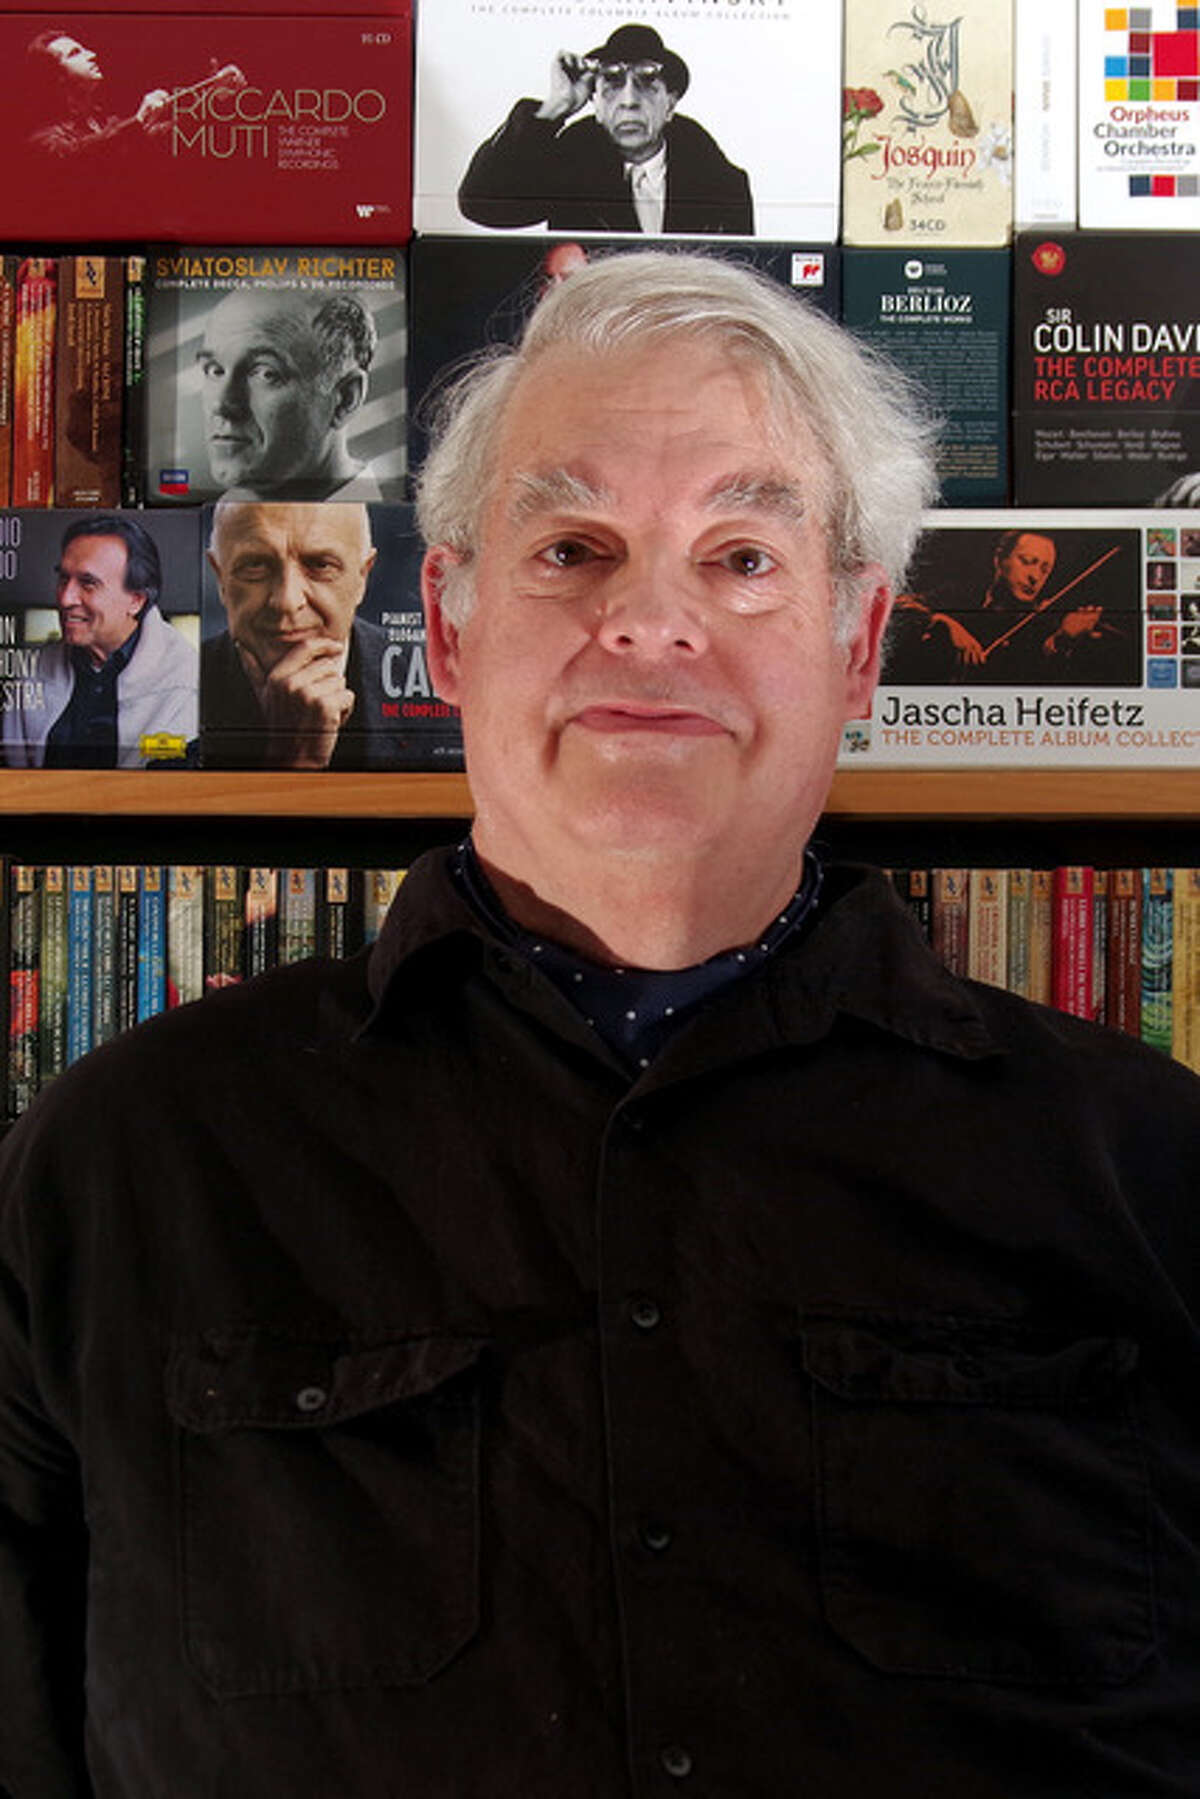 Byron Nilsson in front of his CD collection.  (Byron Nilsson)